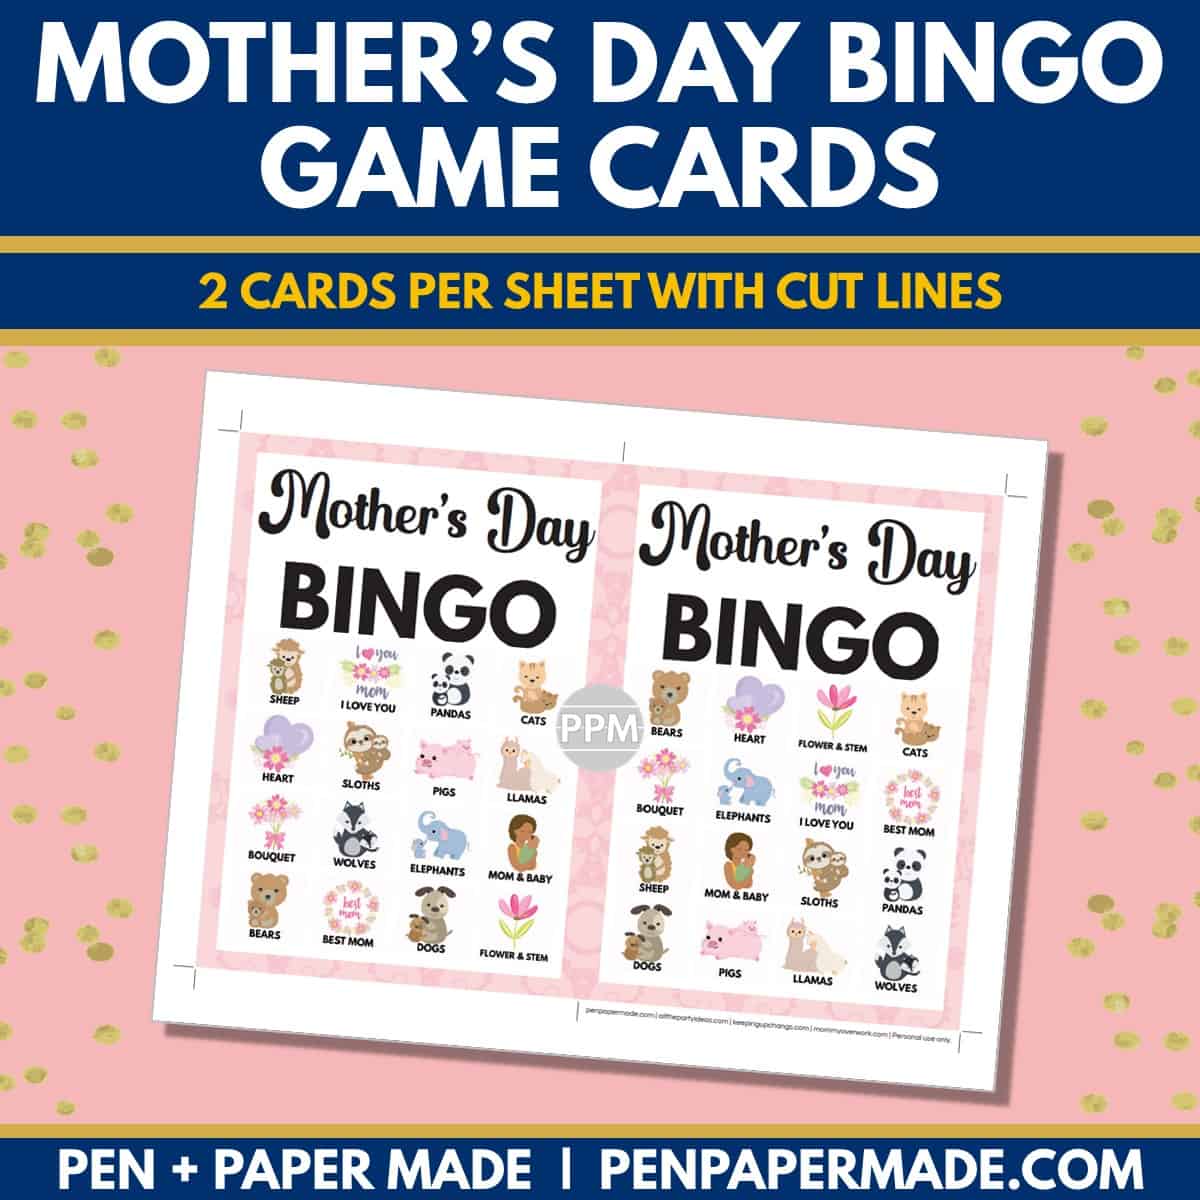 mother's day bingo card 4x4 5x7 game boards with images and text words.